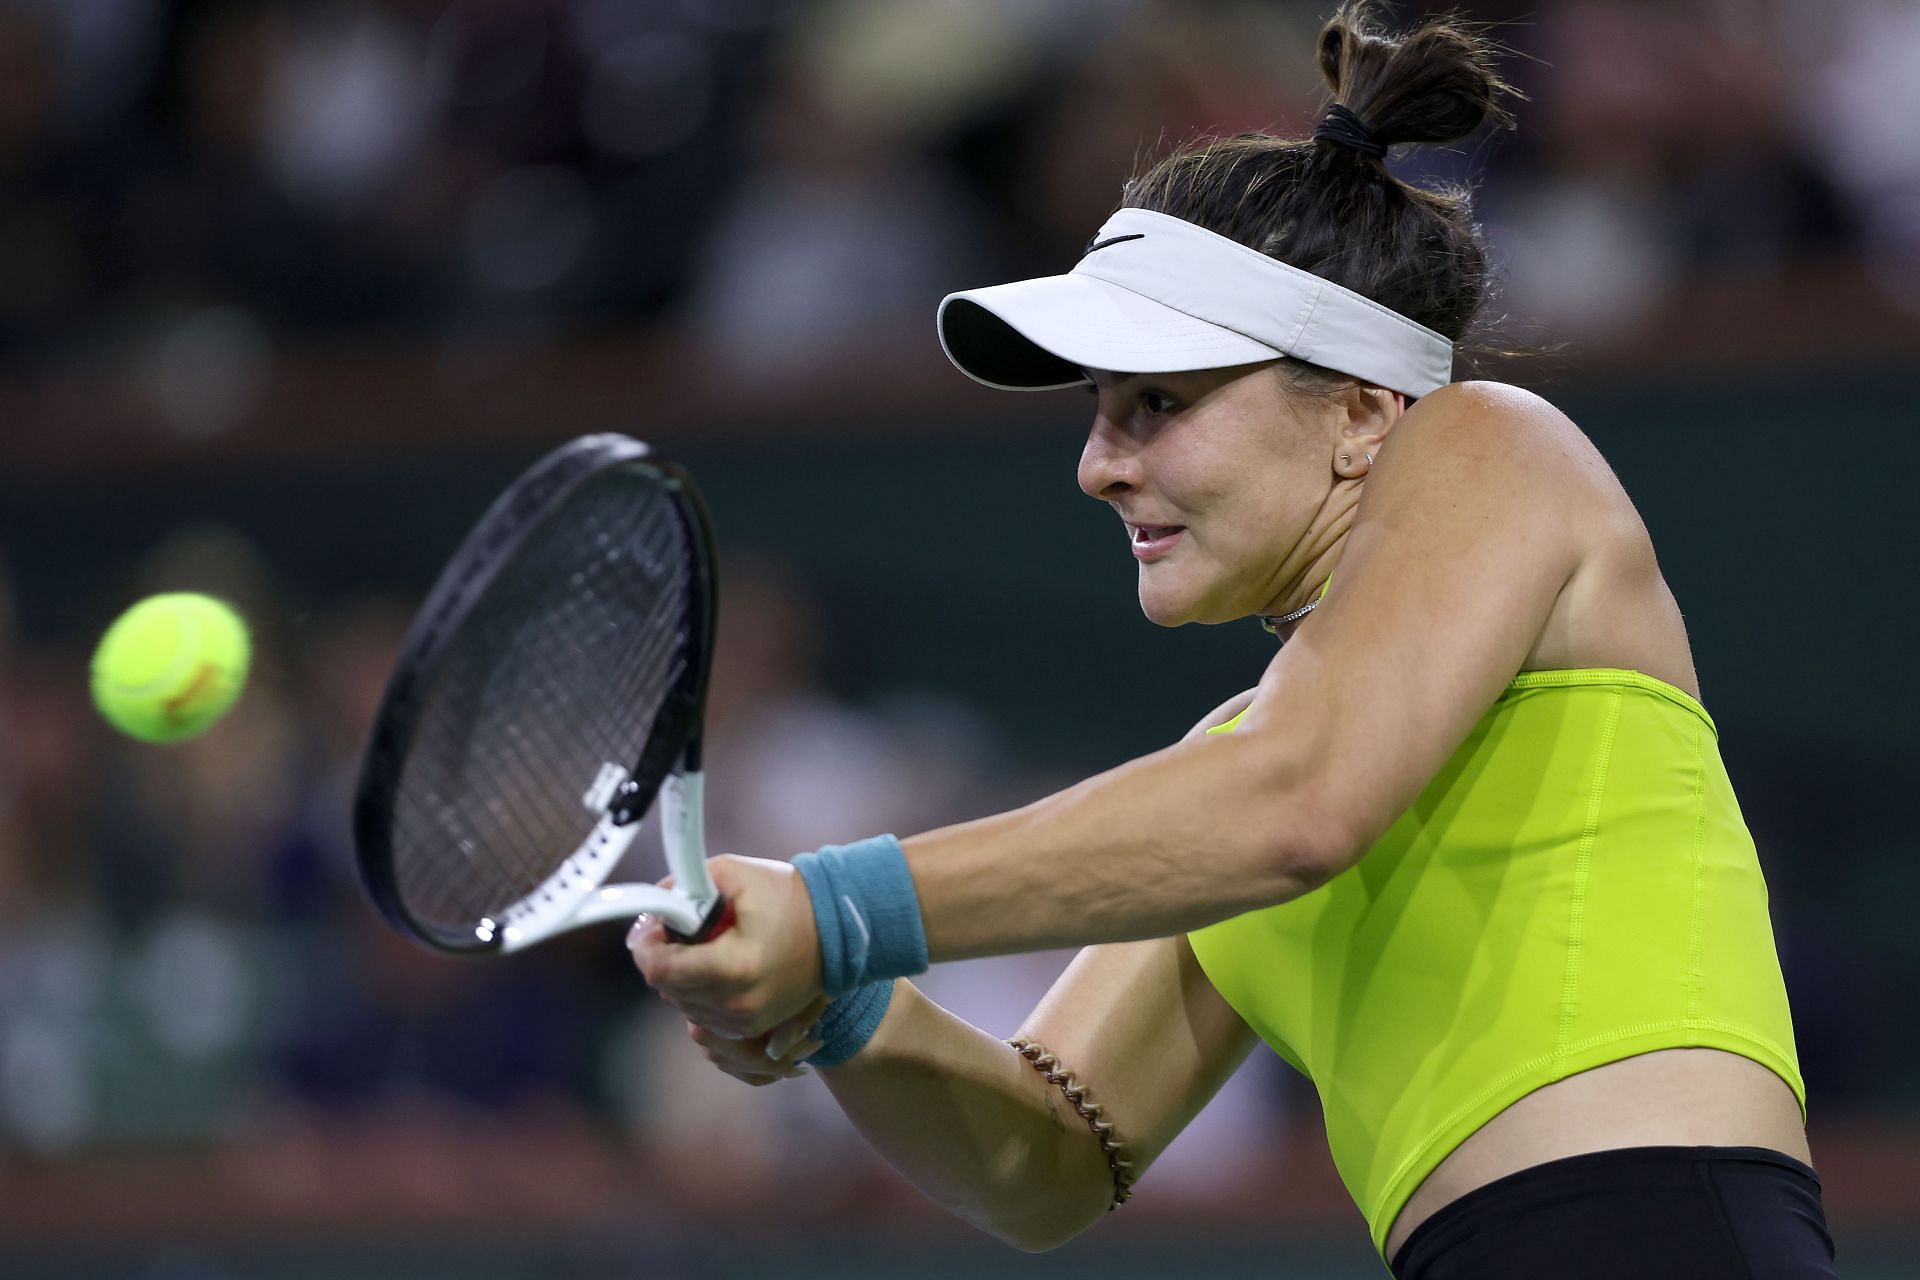 Bianca Andreescu in action at the BNP Paribas Open